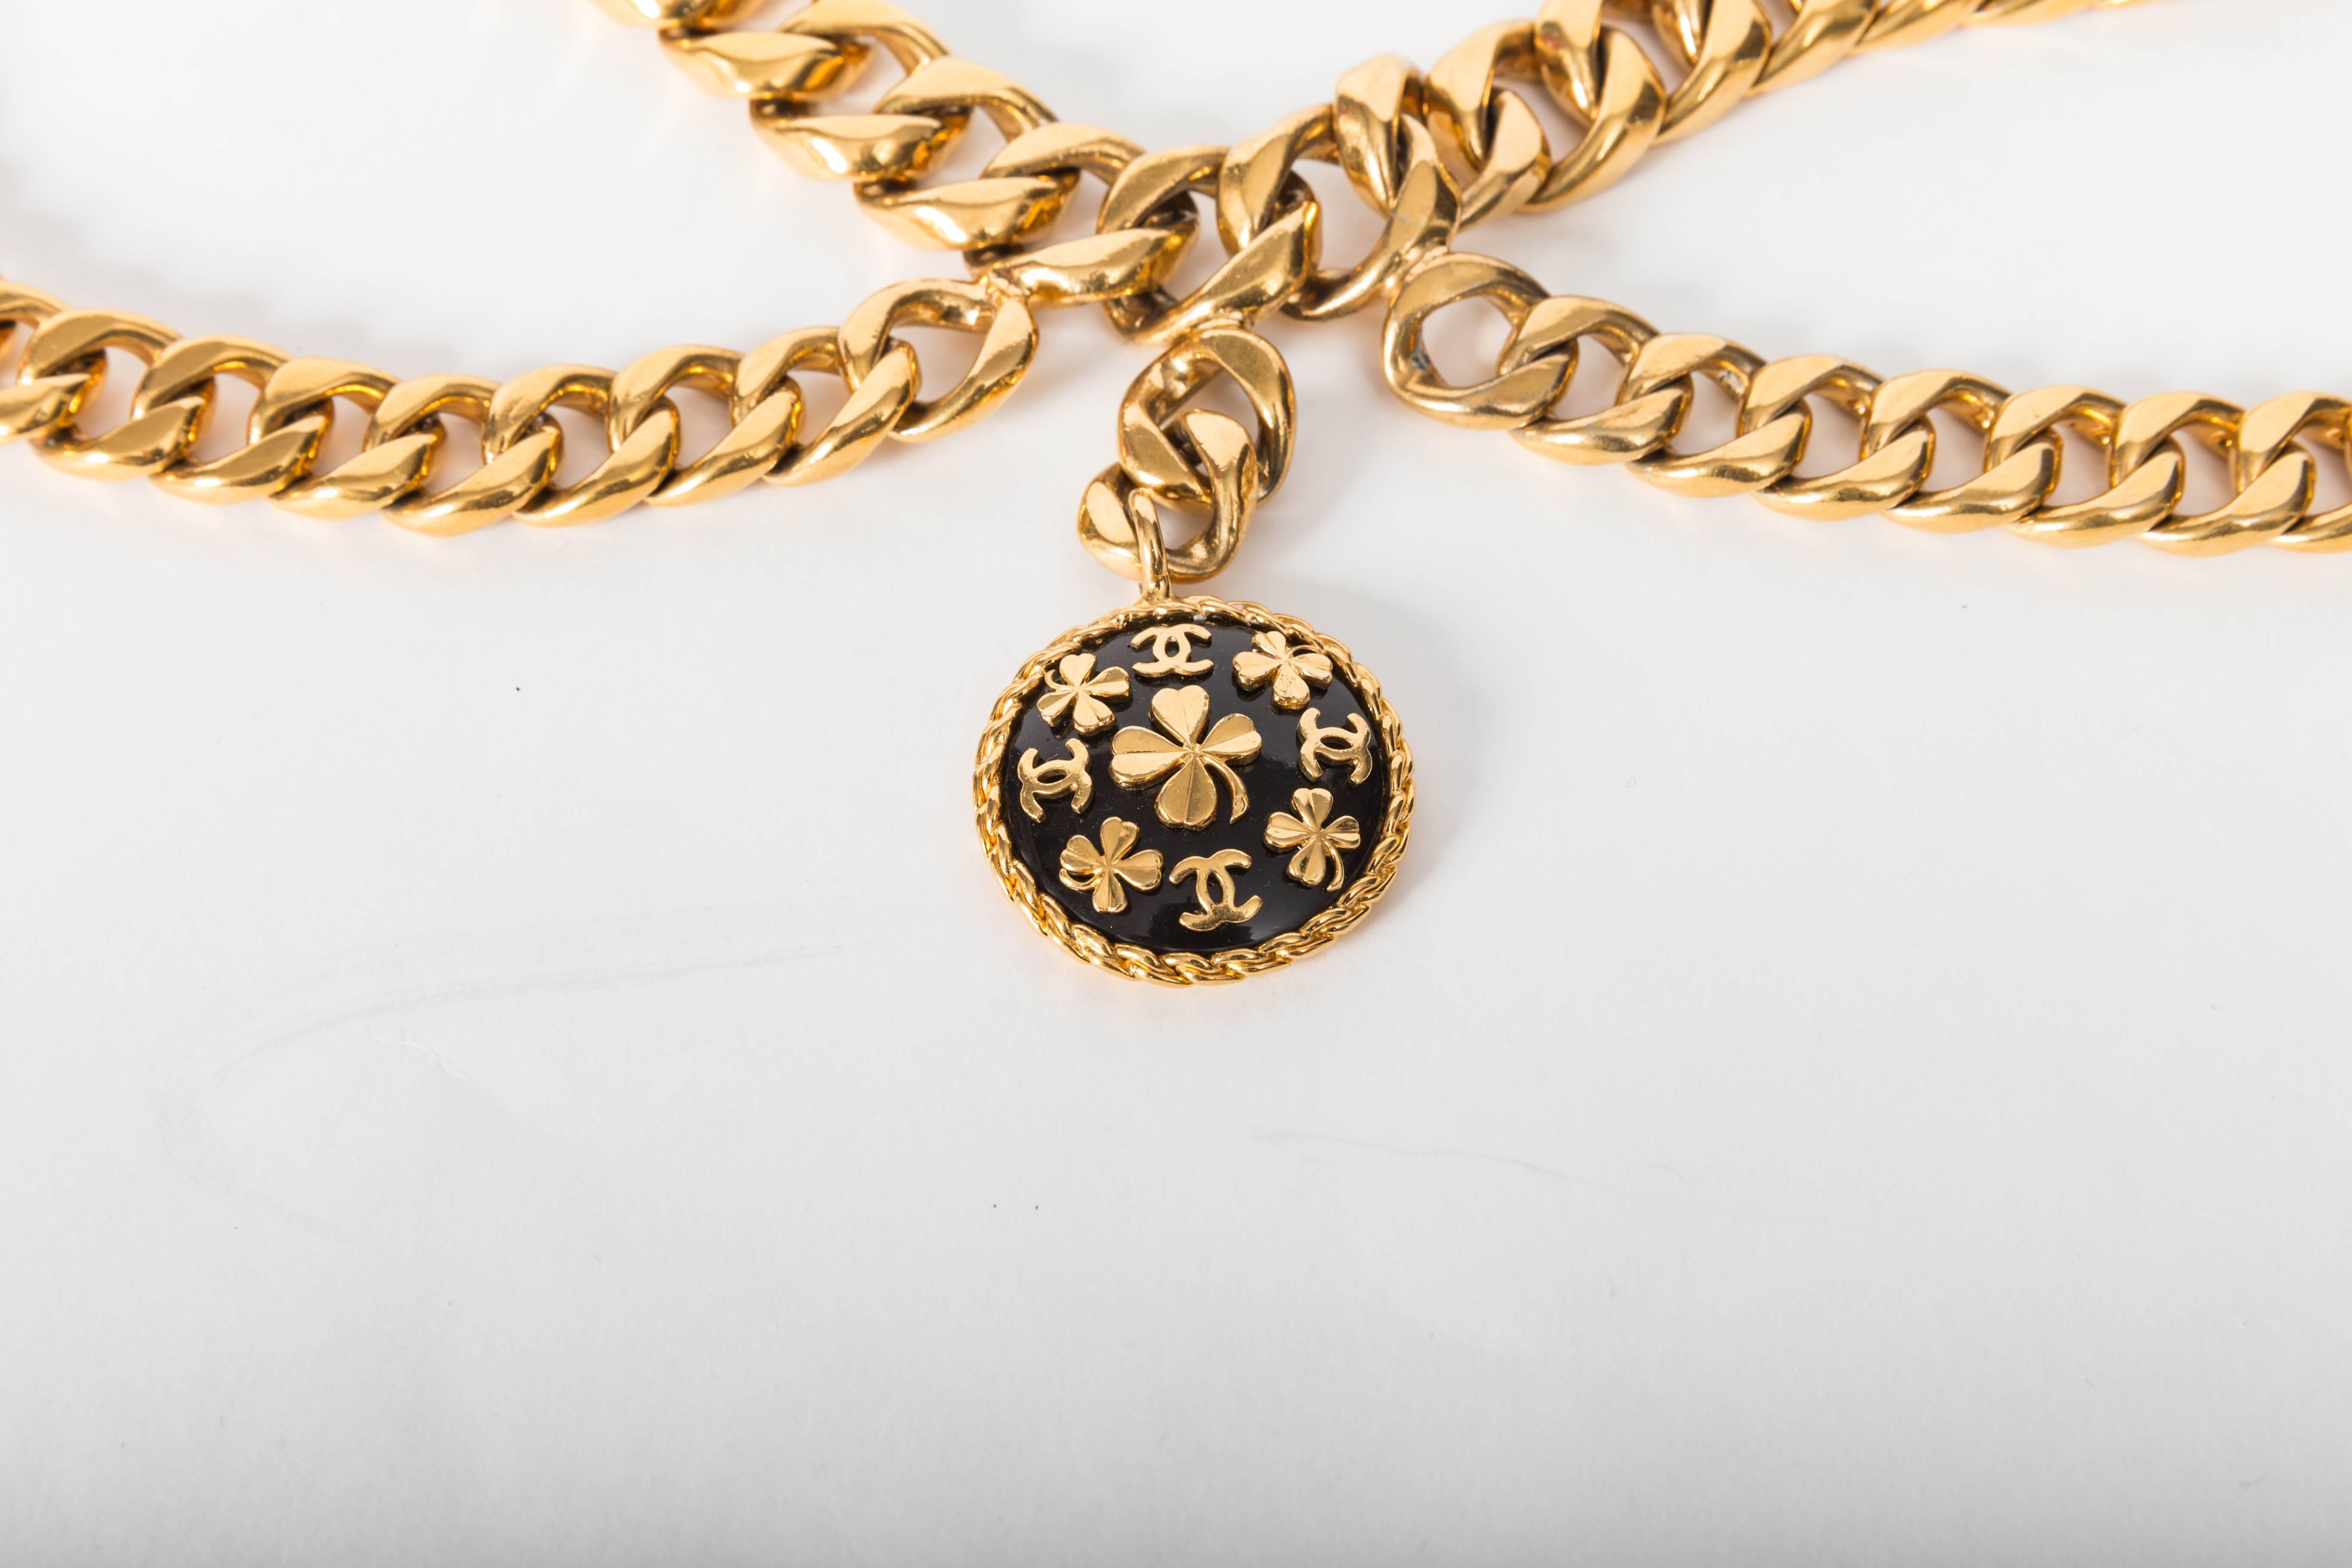 Women's or Men's Chanel Vintage Gold Plated Belt with Charm